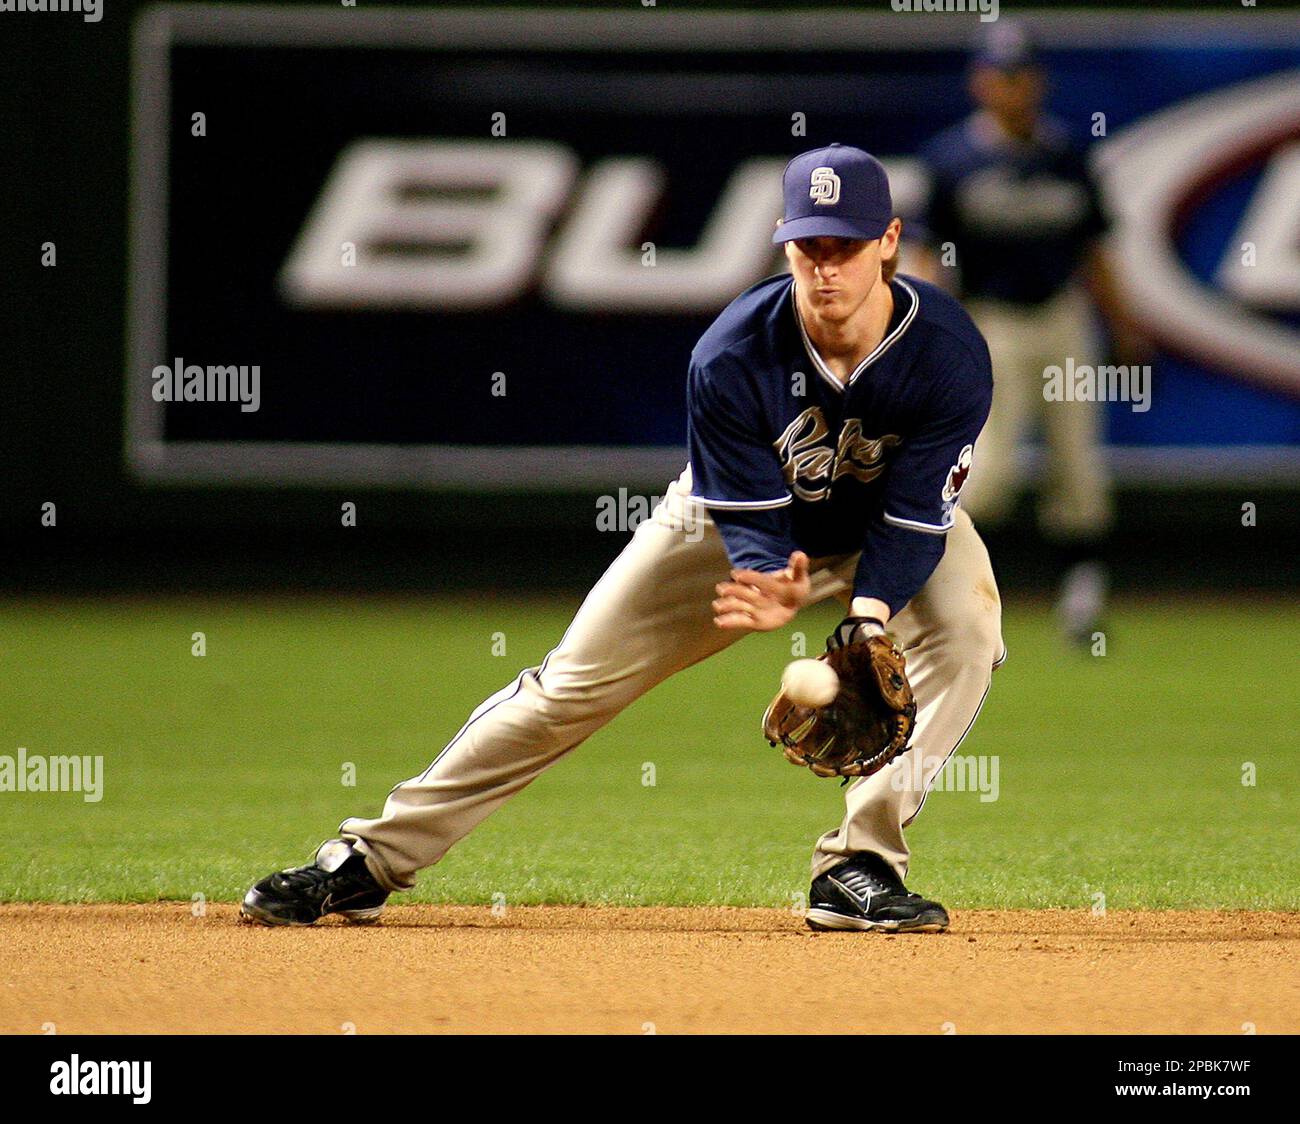 San Diego Padres shortstop Khalil Greene makes the play to first base for  the out against the Arizona Diamondbacks during a baseball game on Tuesday,  April 24, 2007, in Phoenix. Greene went